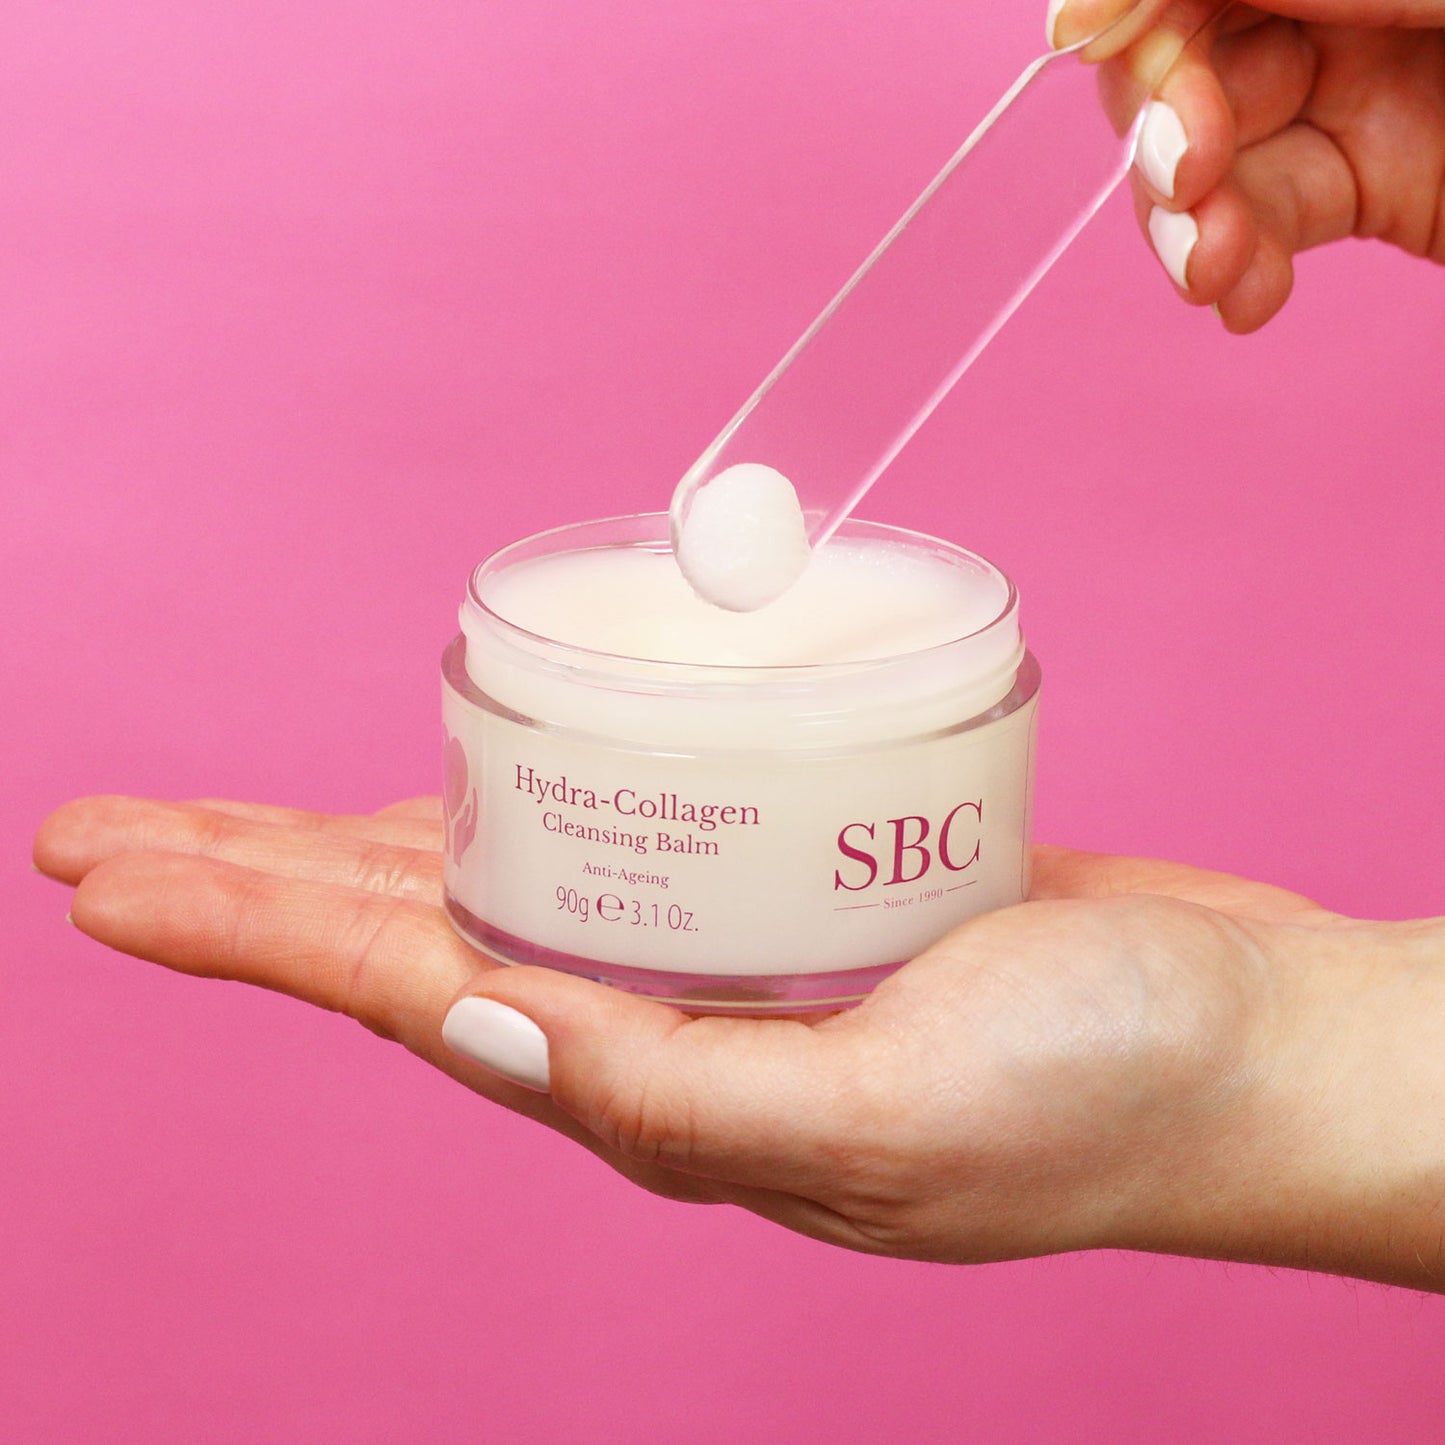 Hydra-Collagen Cleansing Balm on a plastic spatula on a bright pink background 